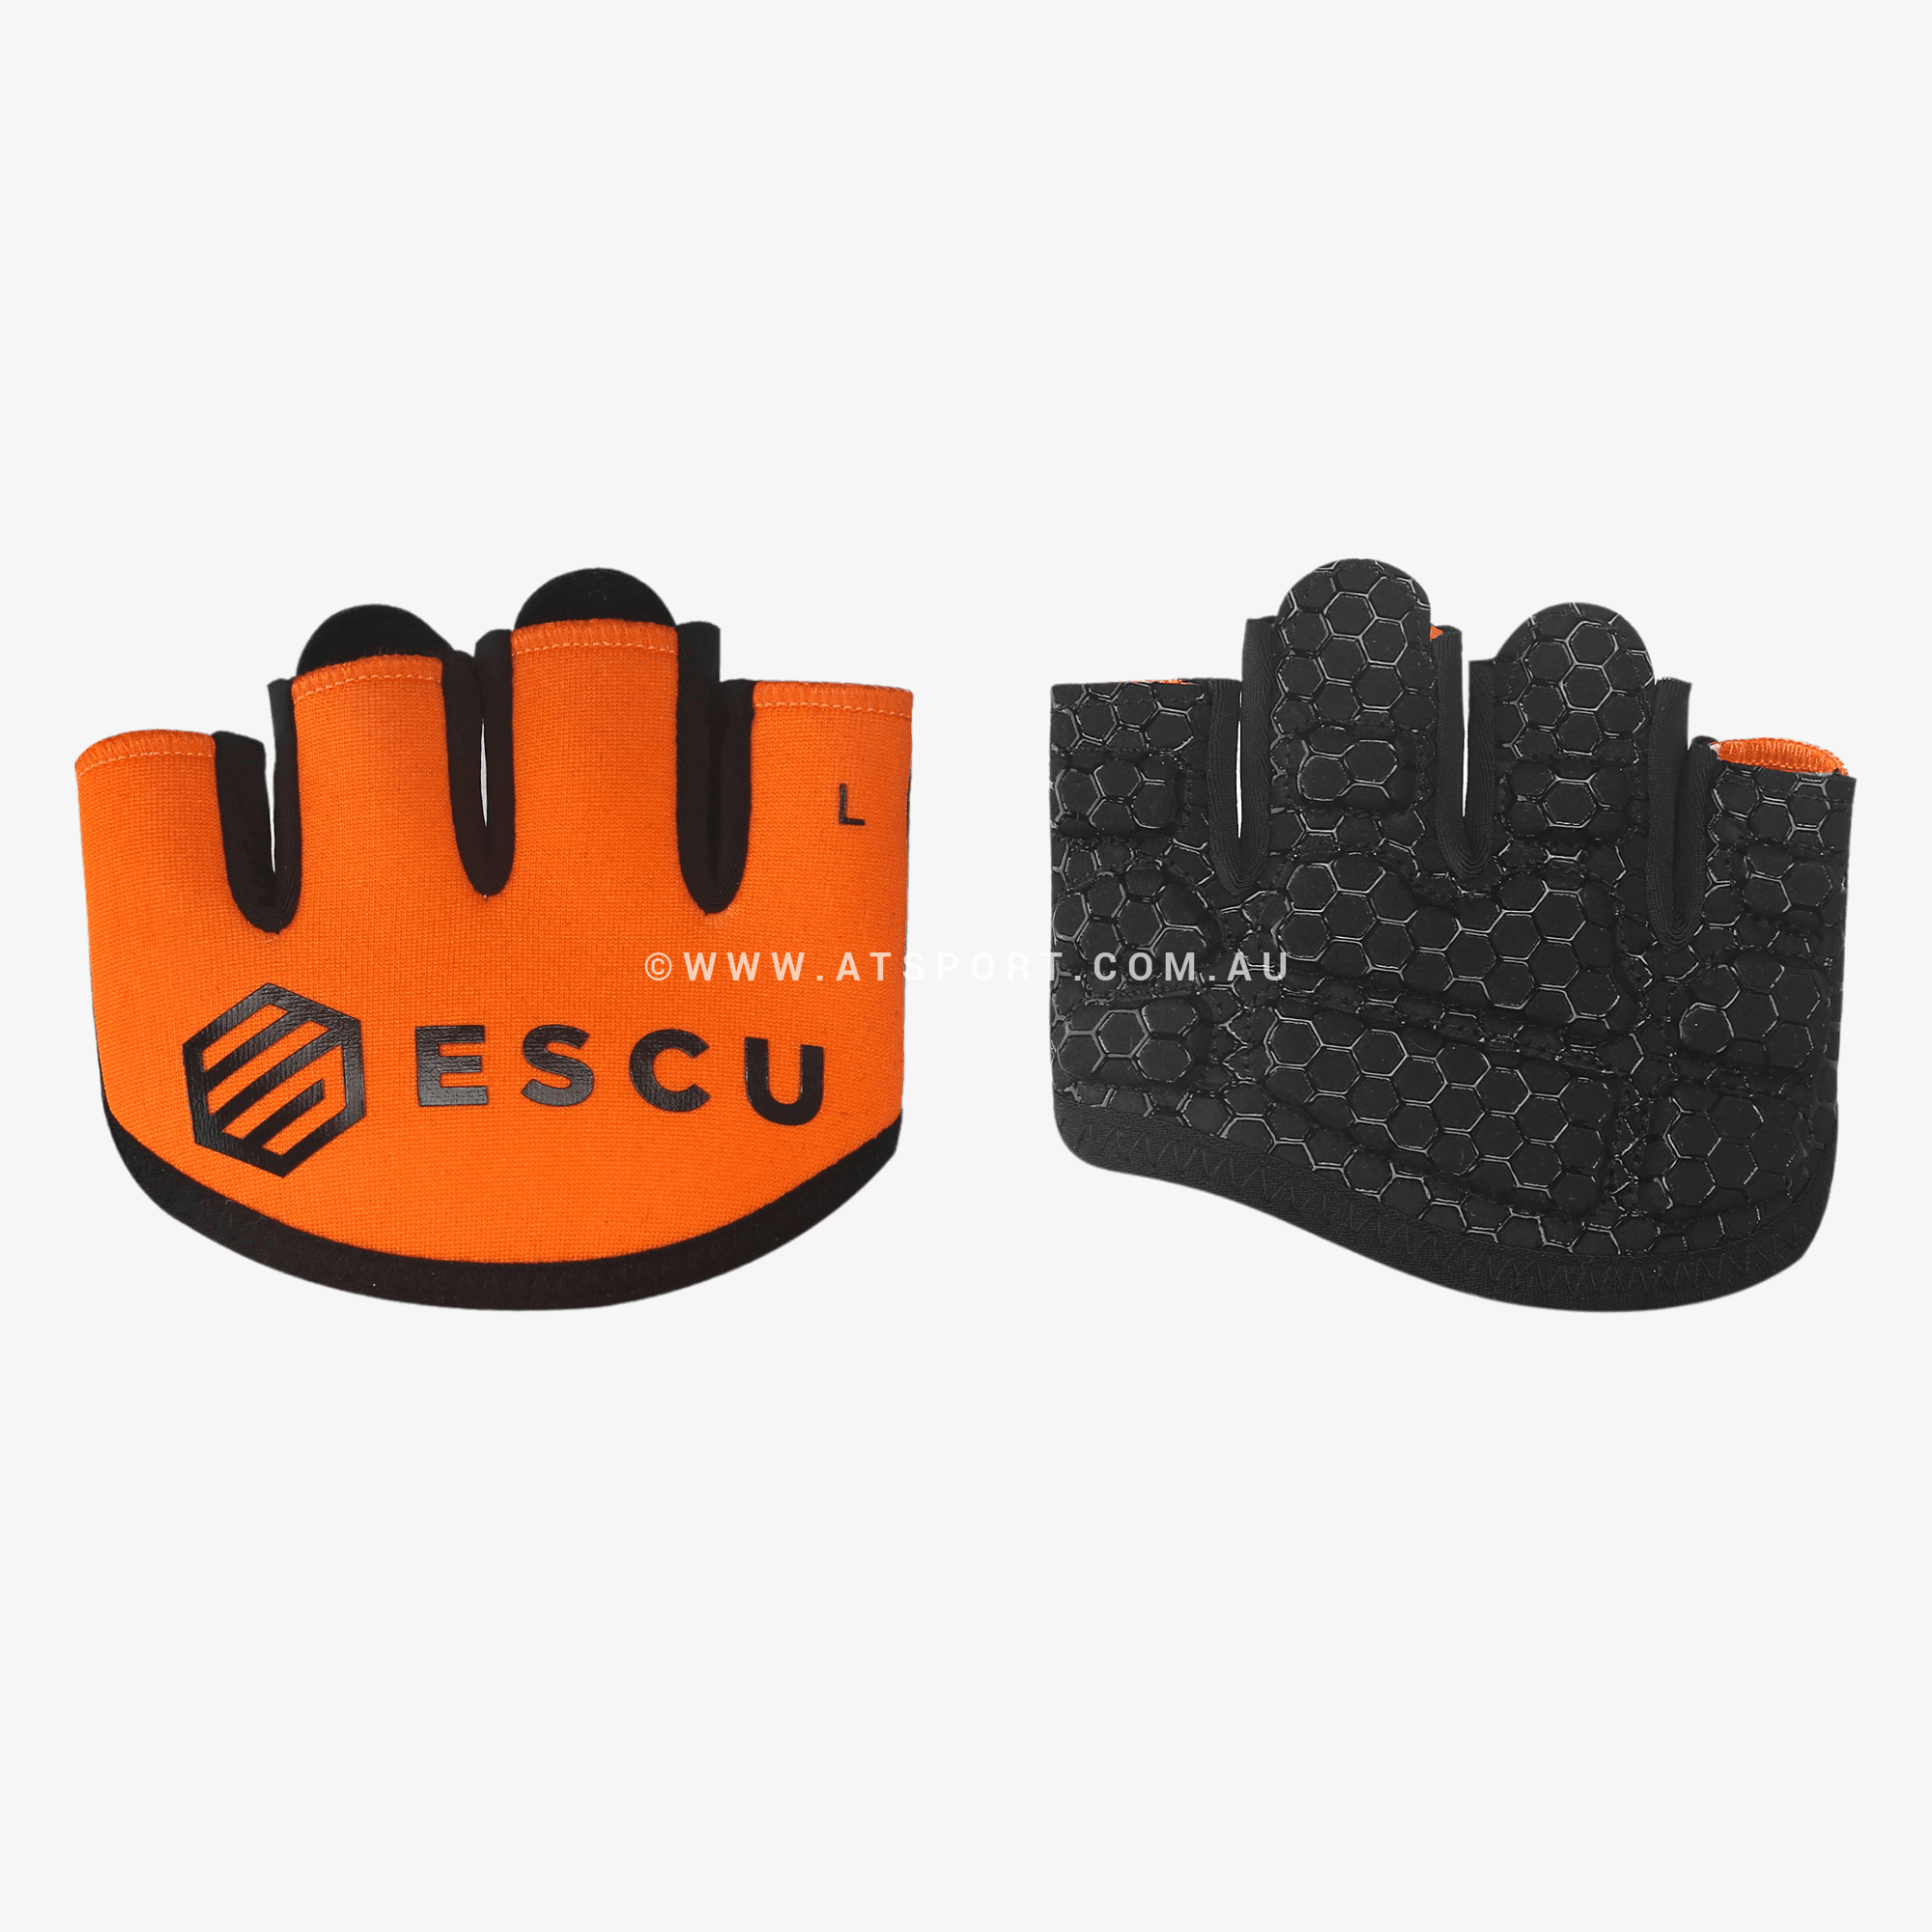 ESCU Fielding Mitts - AT Sports